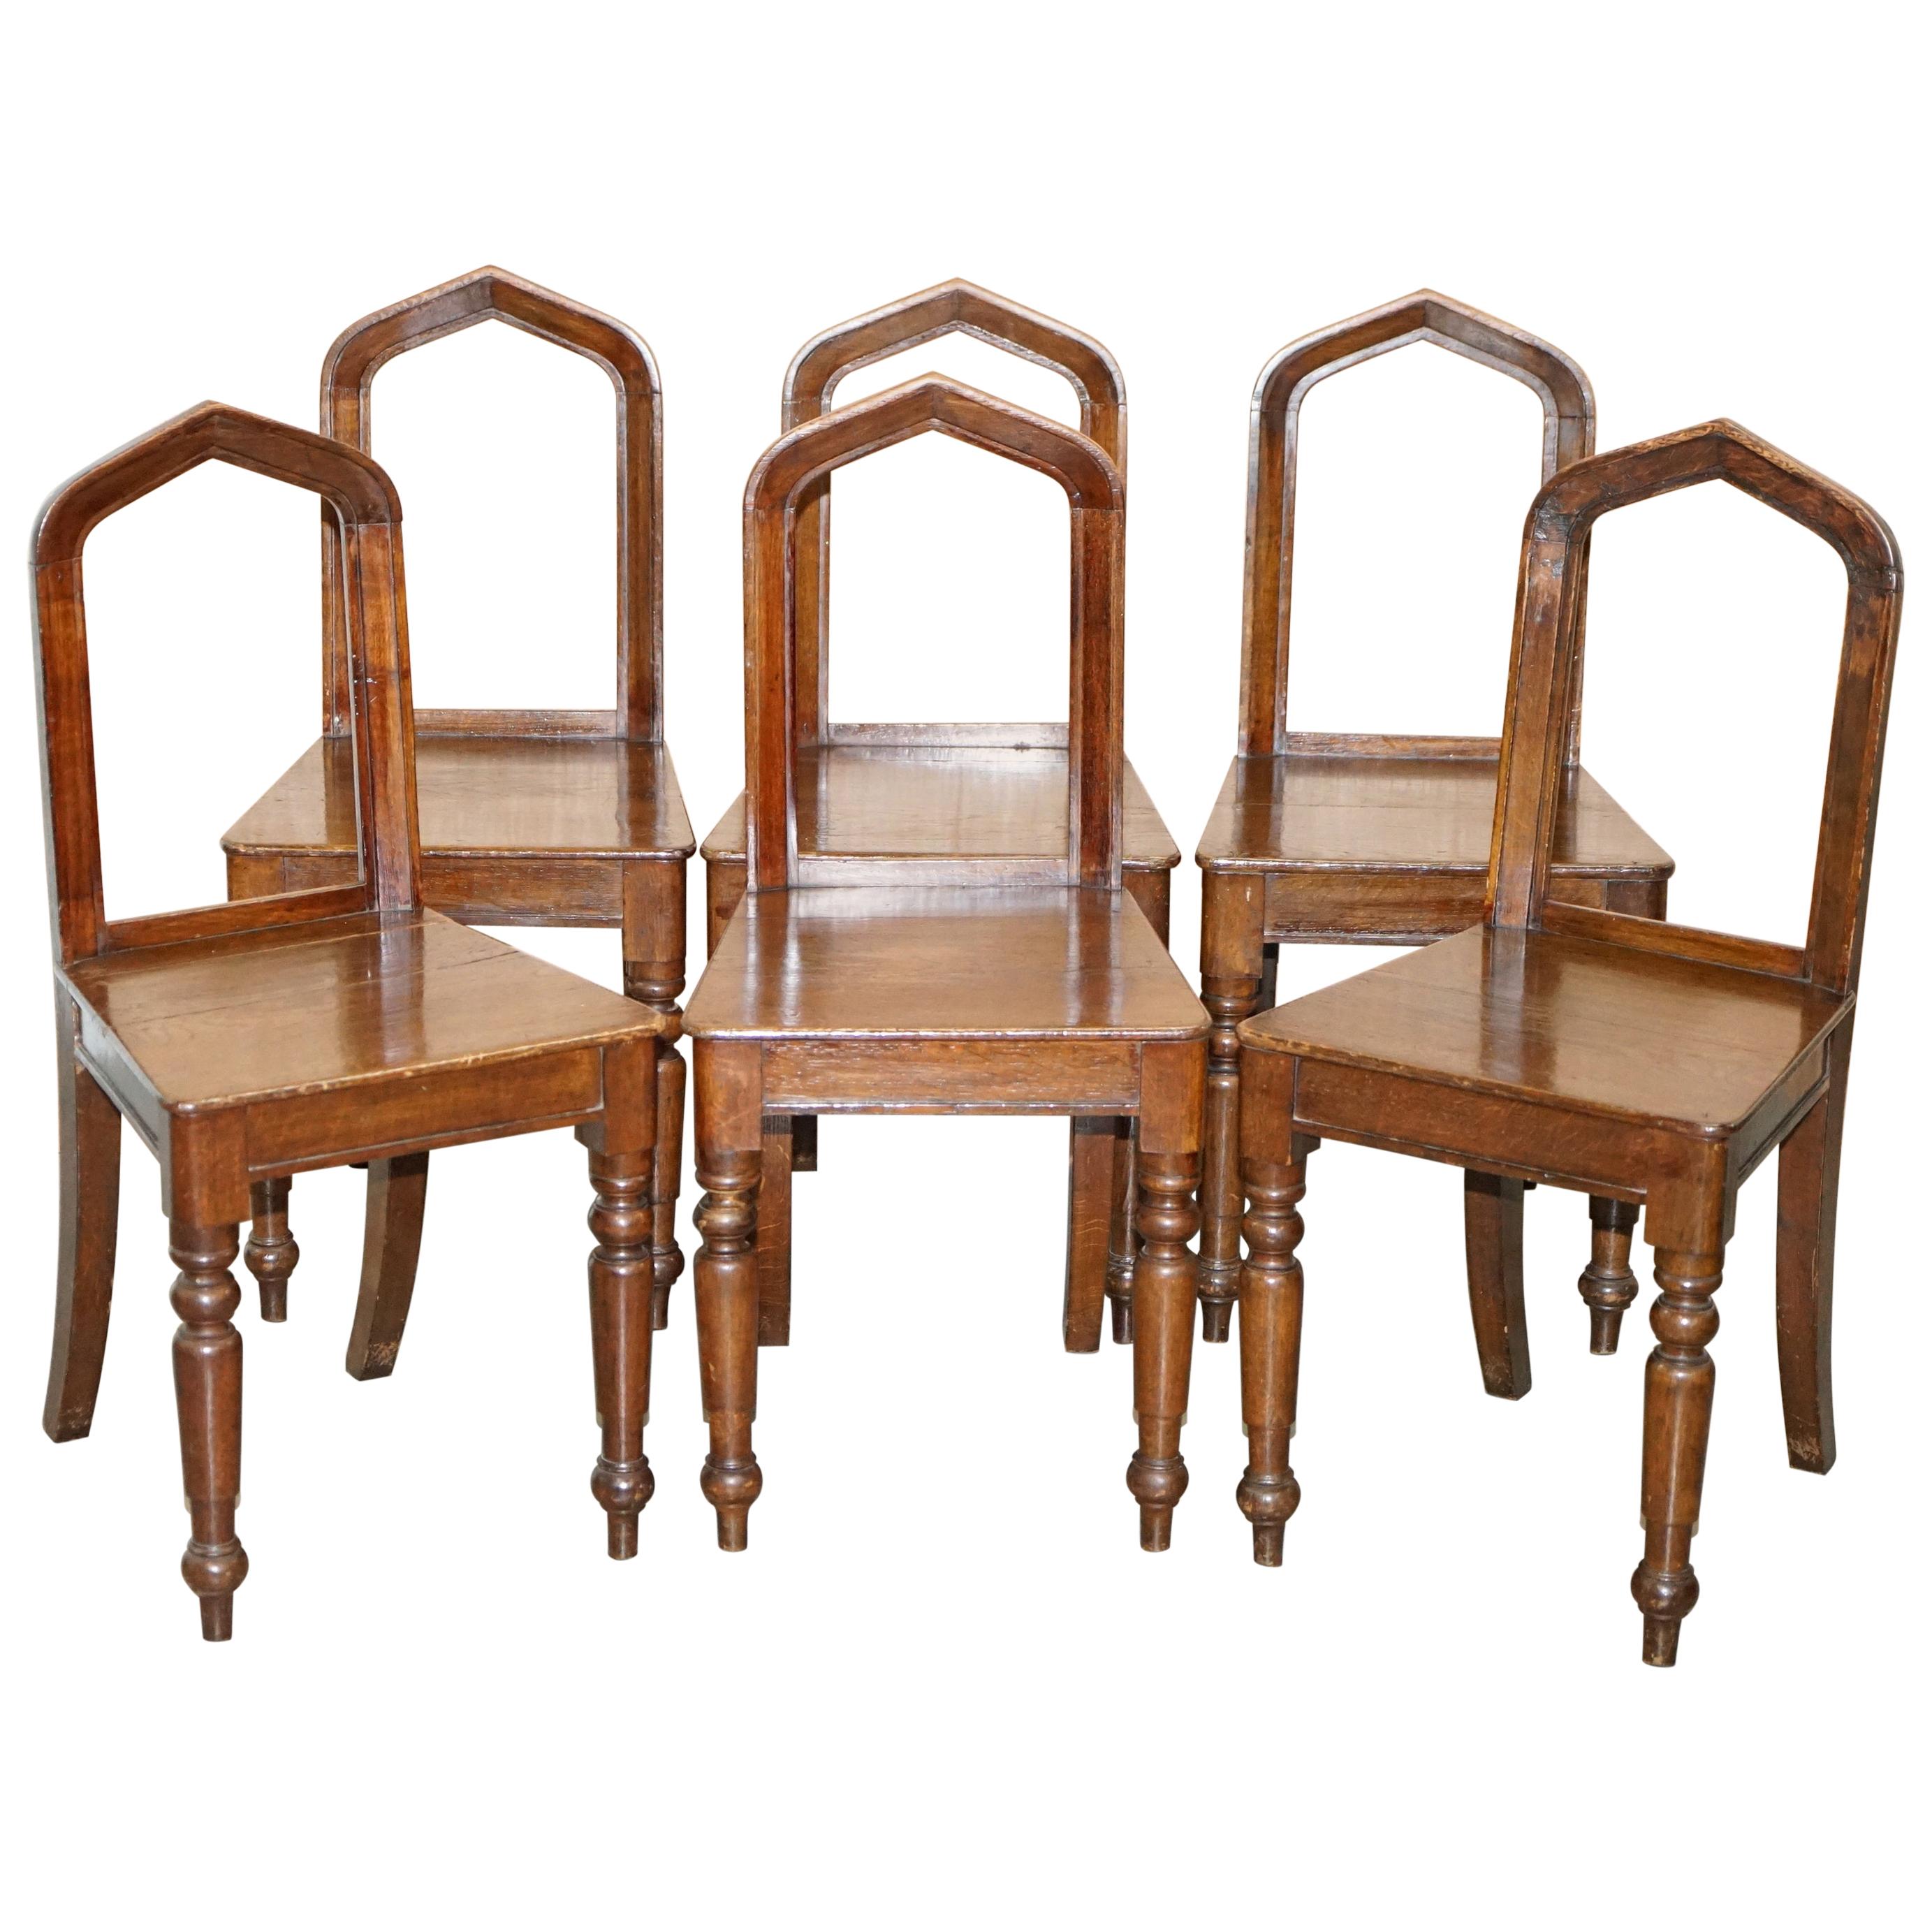 Six Original Victorian circa 1890 Steeple Back Gothic Arch Oak Dining Chairs 6